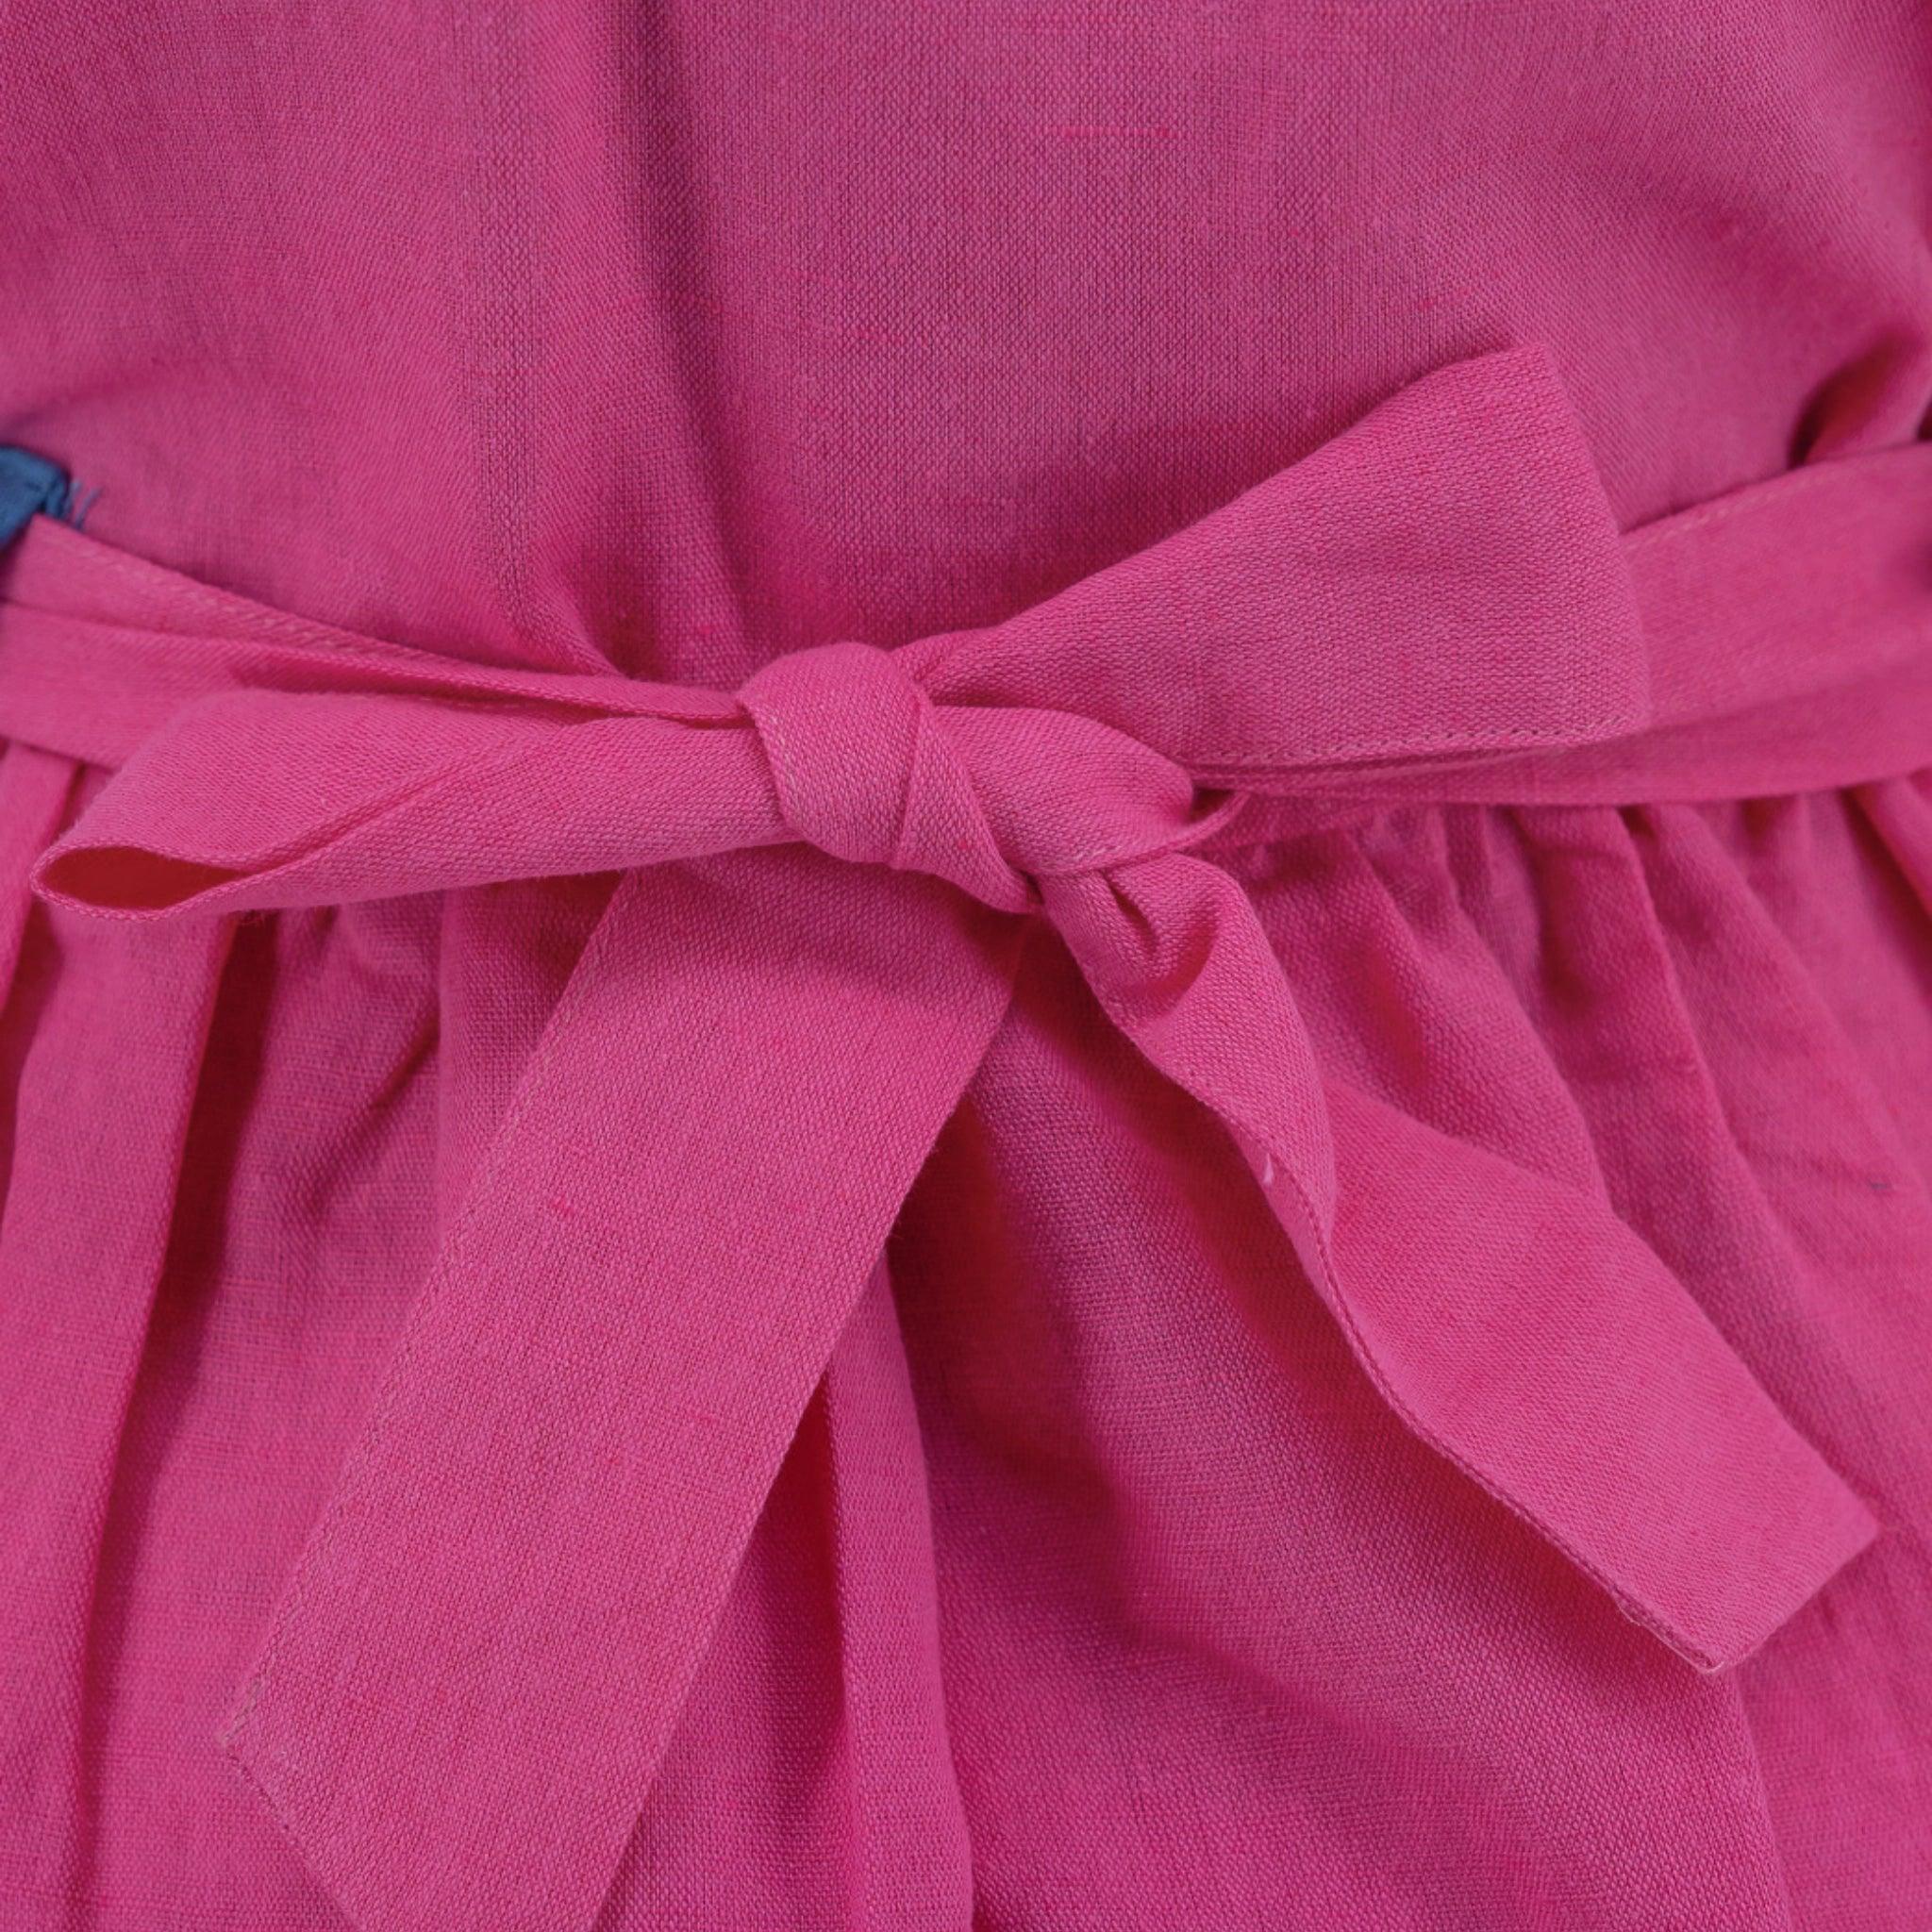 Close-up of a Karee fuchsia purple linen waistband tied in a bow on a garment.